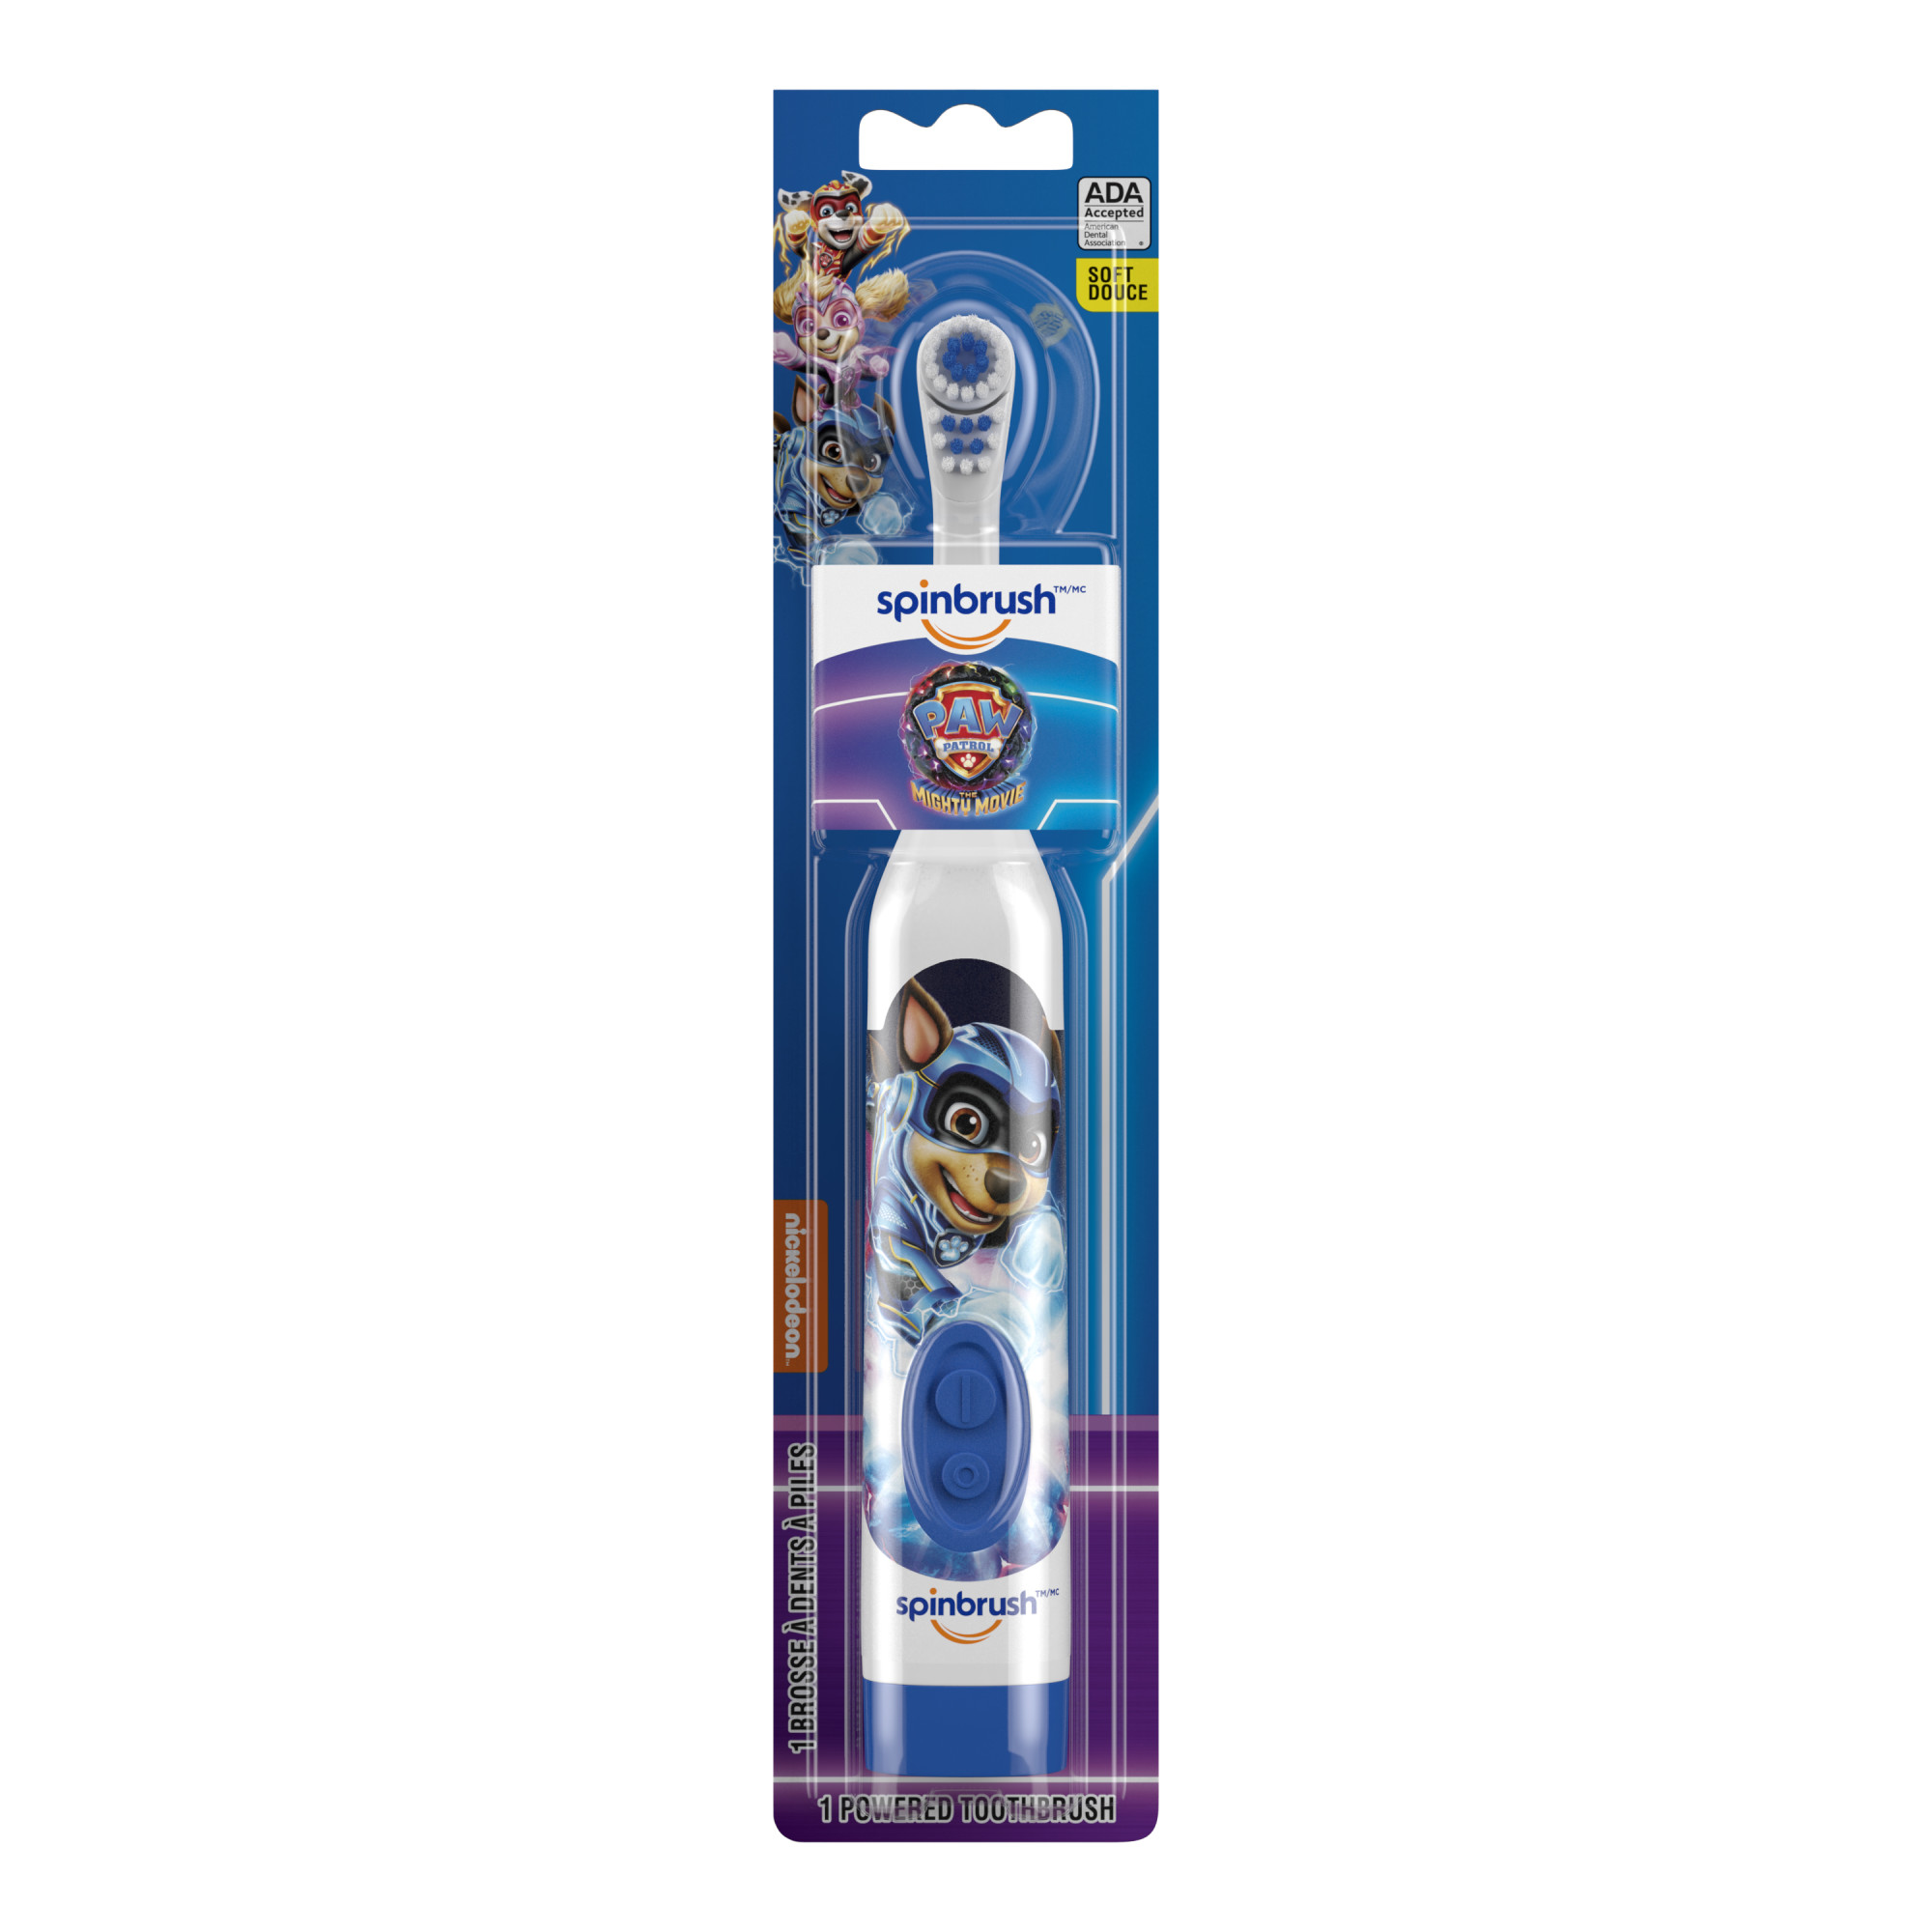 PAW Patrol Spinbrush Kids Battery-Powered Toothbrush, Soft Bristles, Ages 3+, Character May Vary - image 1 of 8